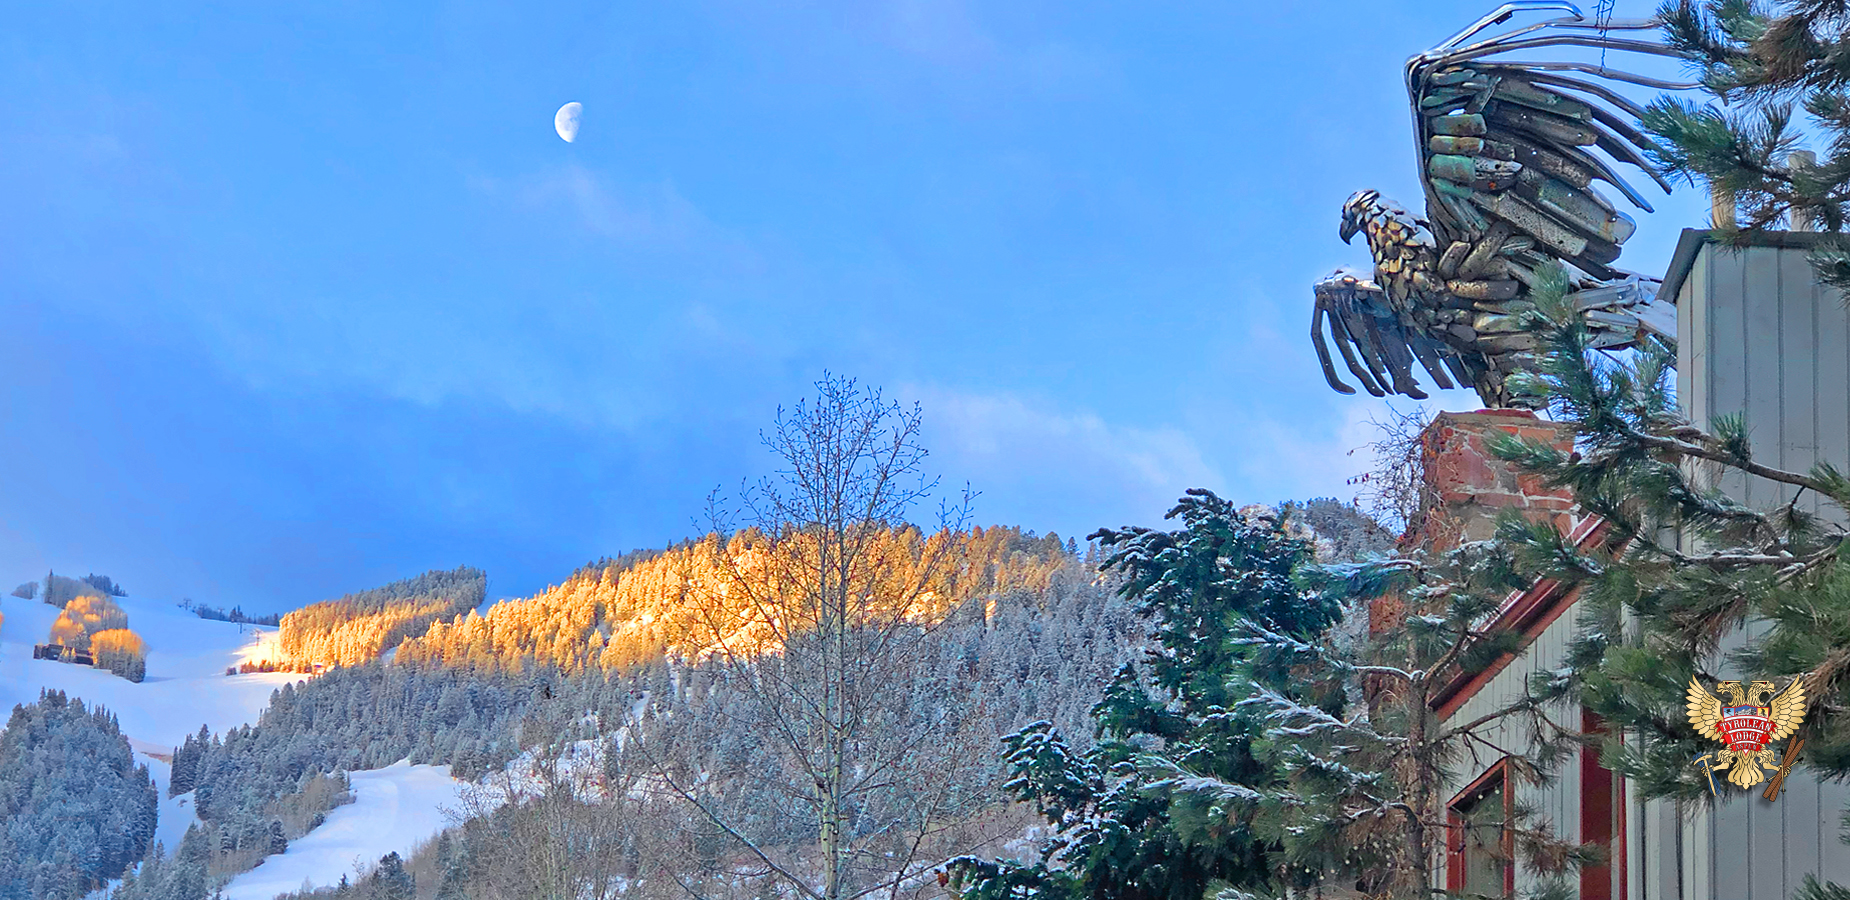 Lou Willie's chrome bumper eagle stares down the moon over Ajax mountain